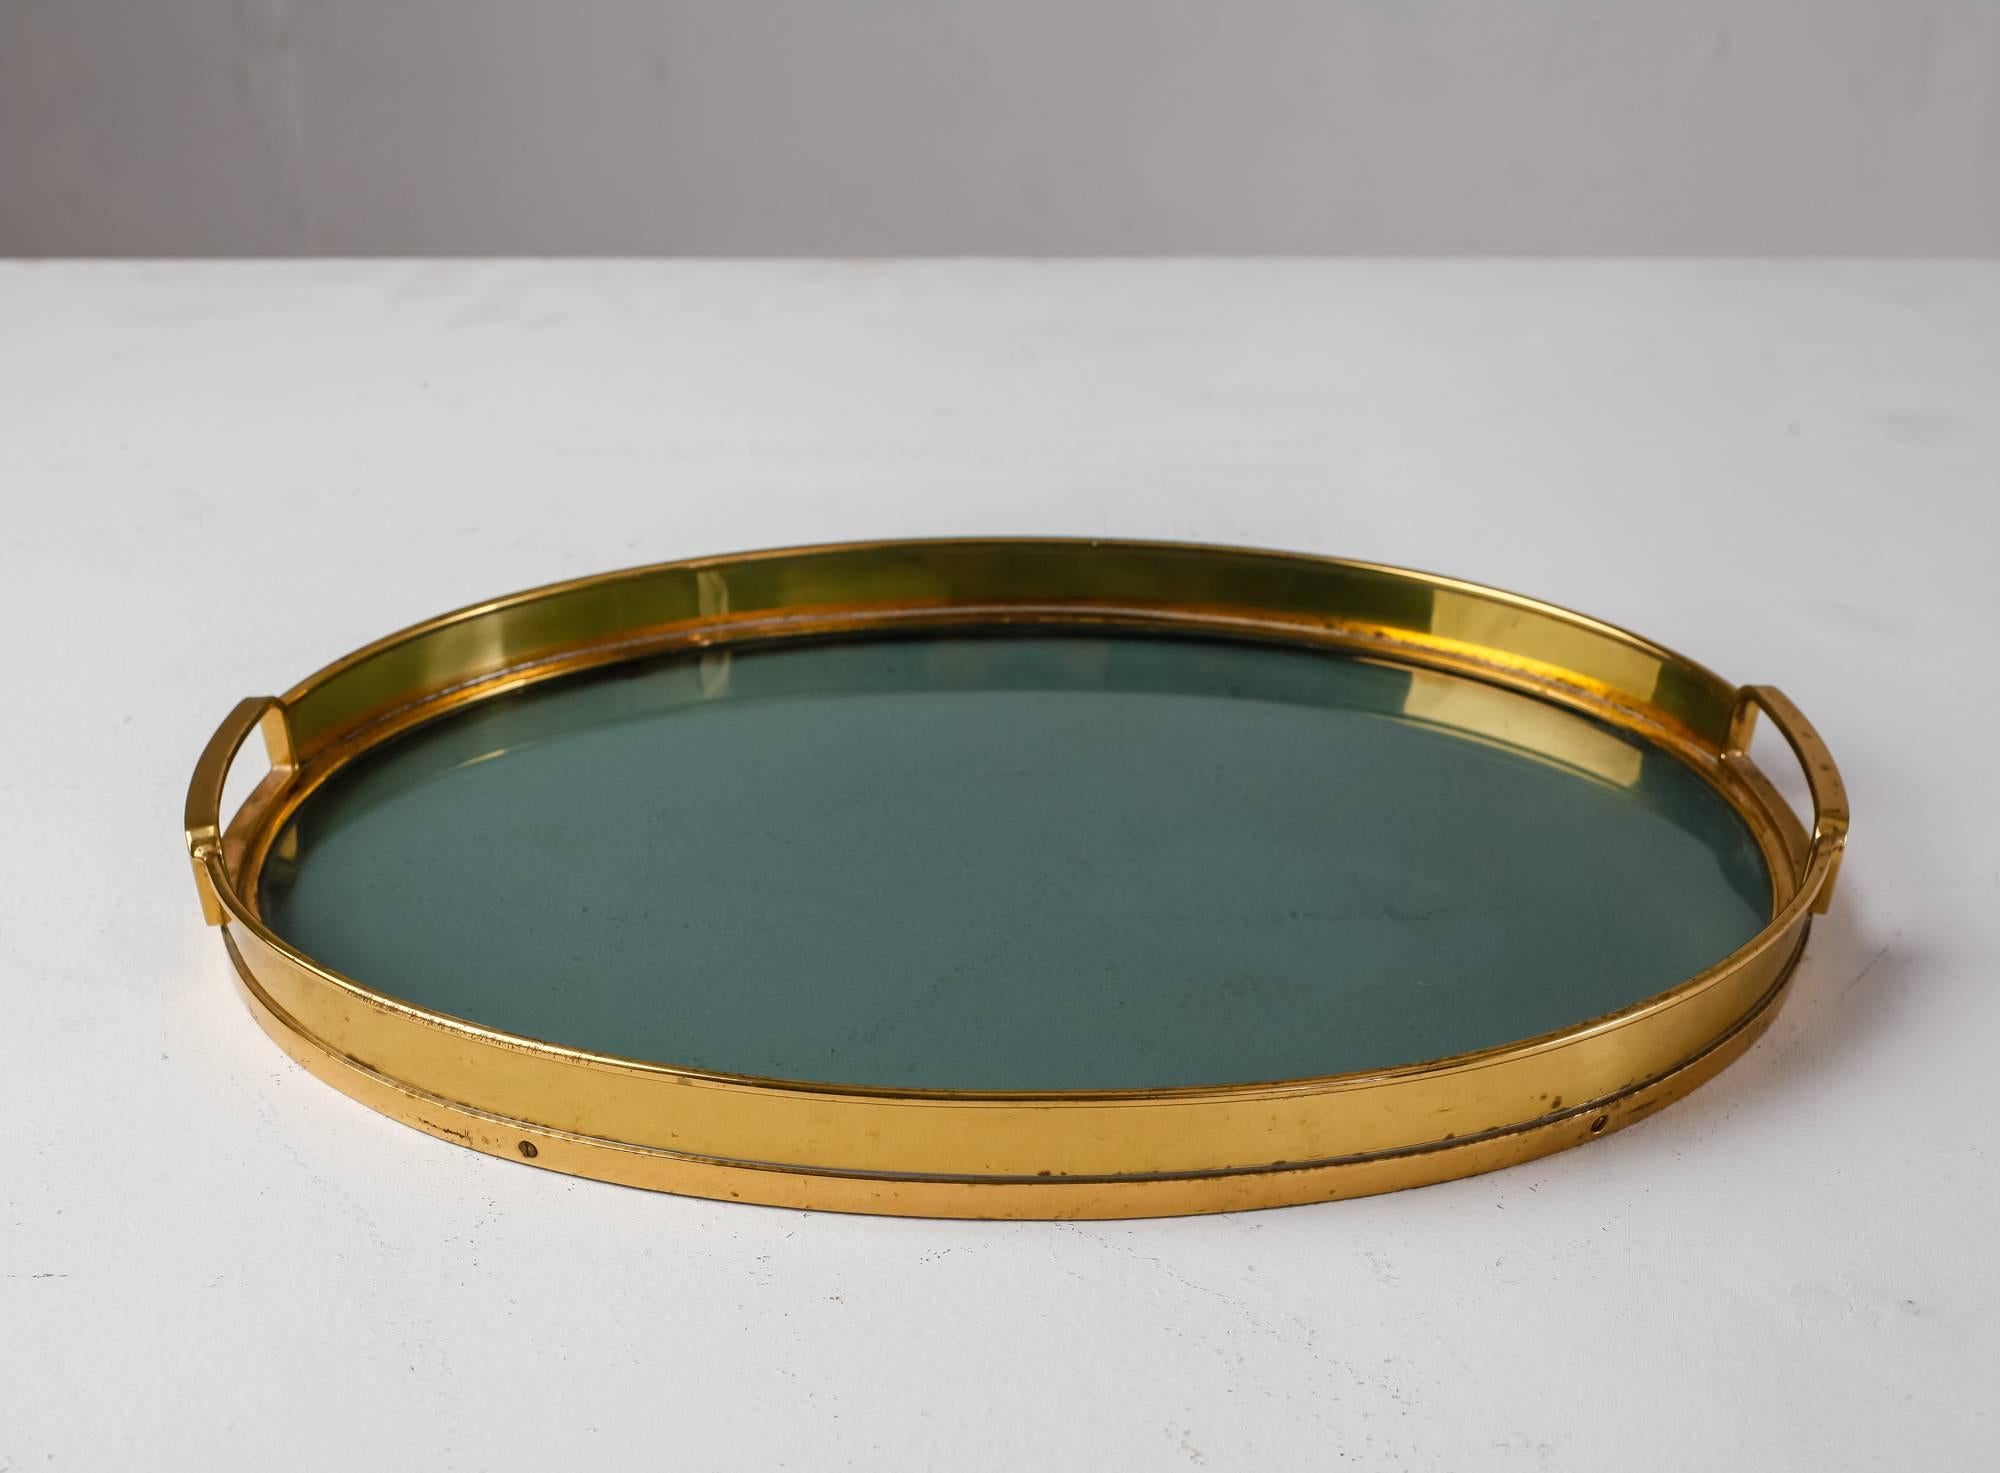 An Italian serving tray, made of an oval brass rim with grips and a smokey glass bottom. The brass has a beautiful patina and the tray is in a great condition.